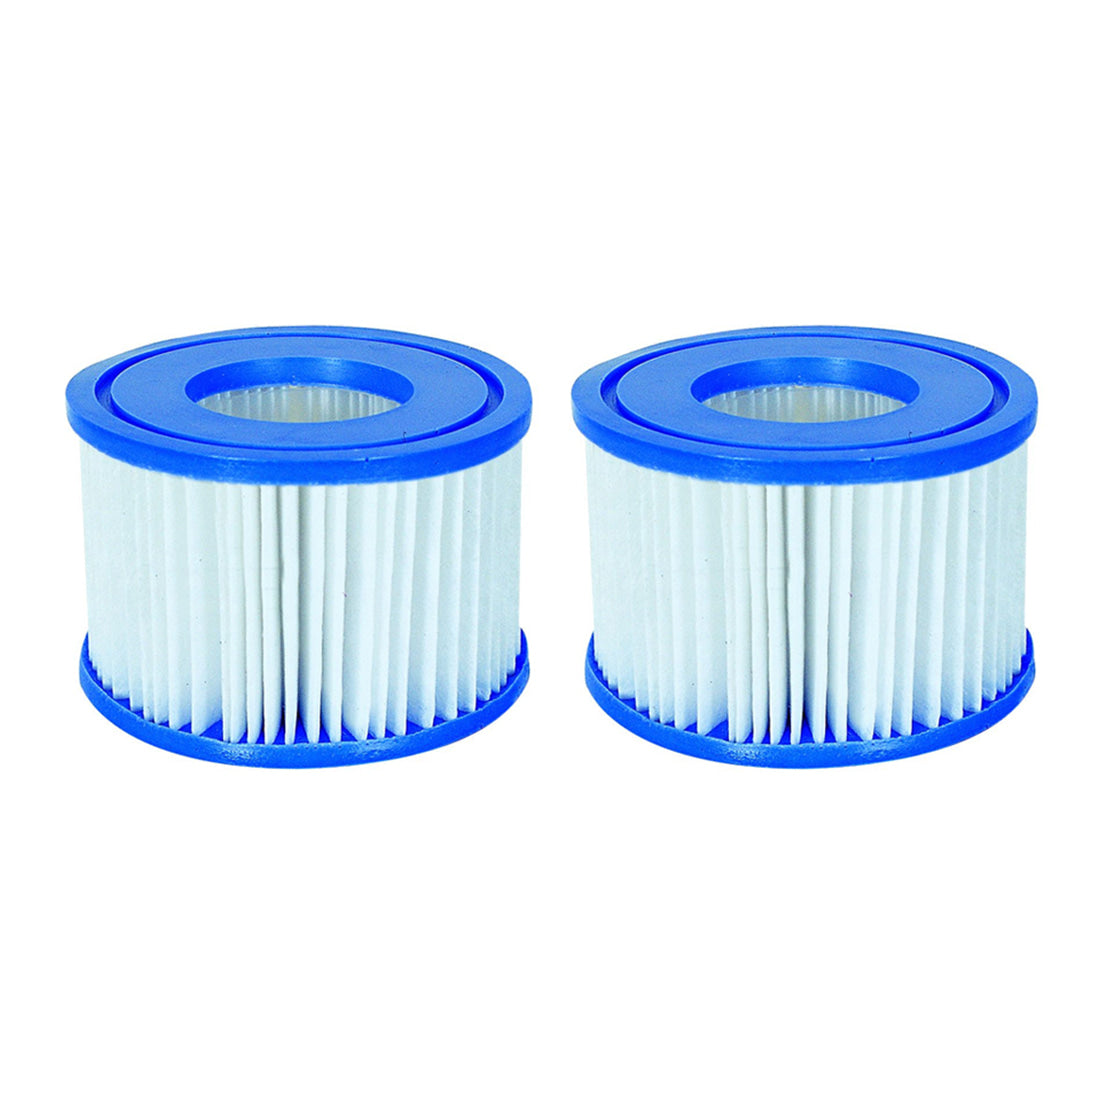 2 x Bestway Lay-Z-Spa Accessories - Replacement Filter Cartridge Type VI 58323